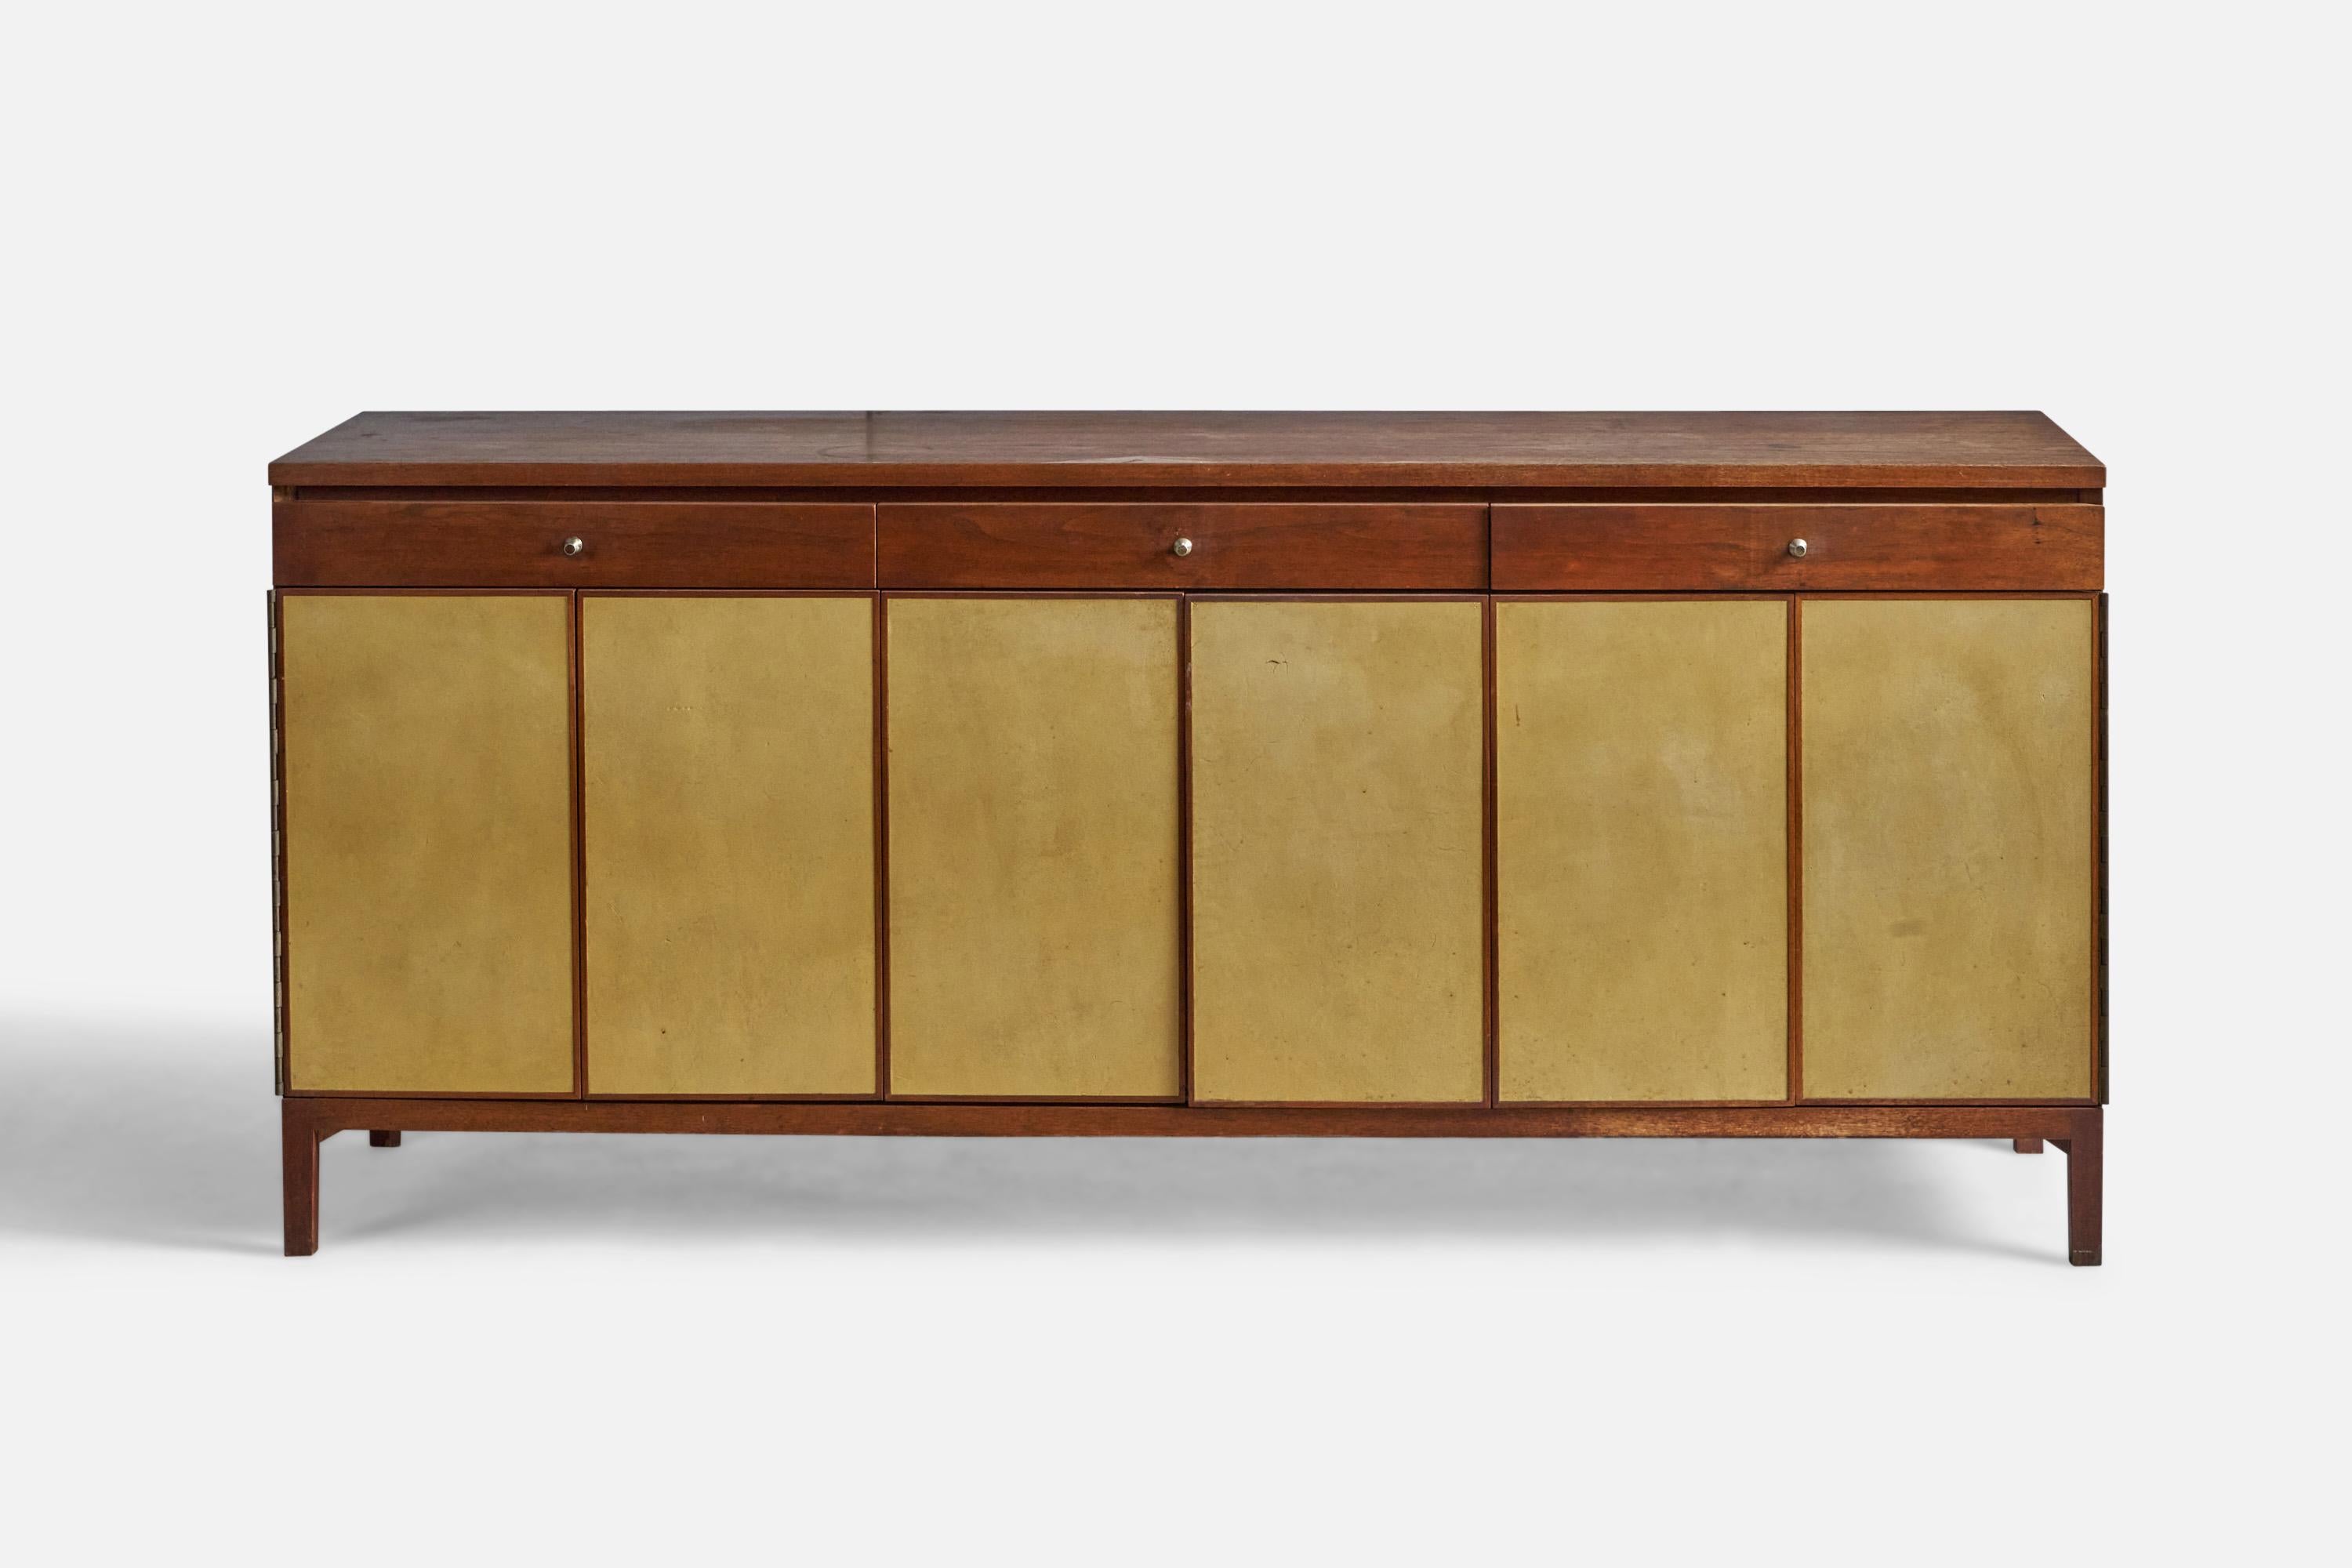 A walnut, leather and metal cabinet or credenza designed by Paul Mccobb and produced by Calvin, USA, 1950s.